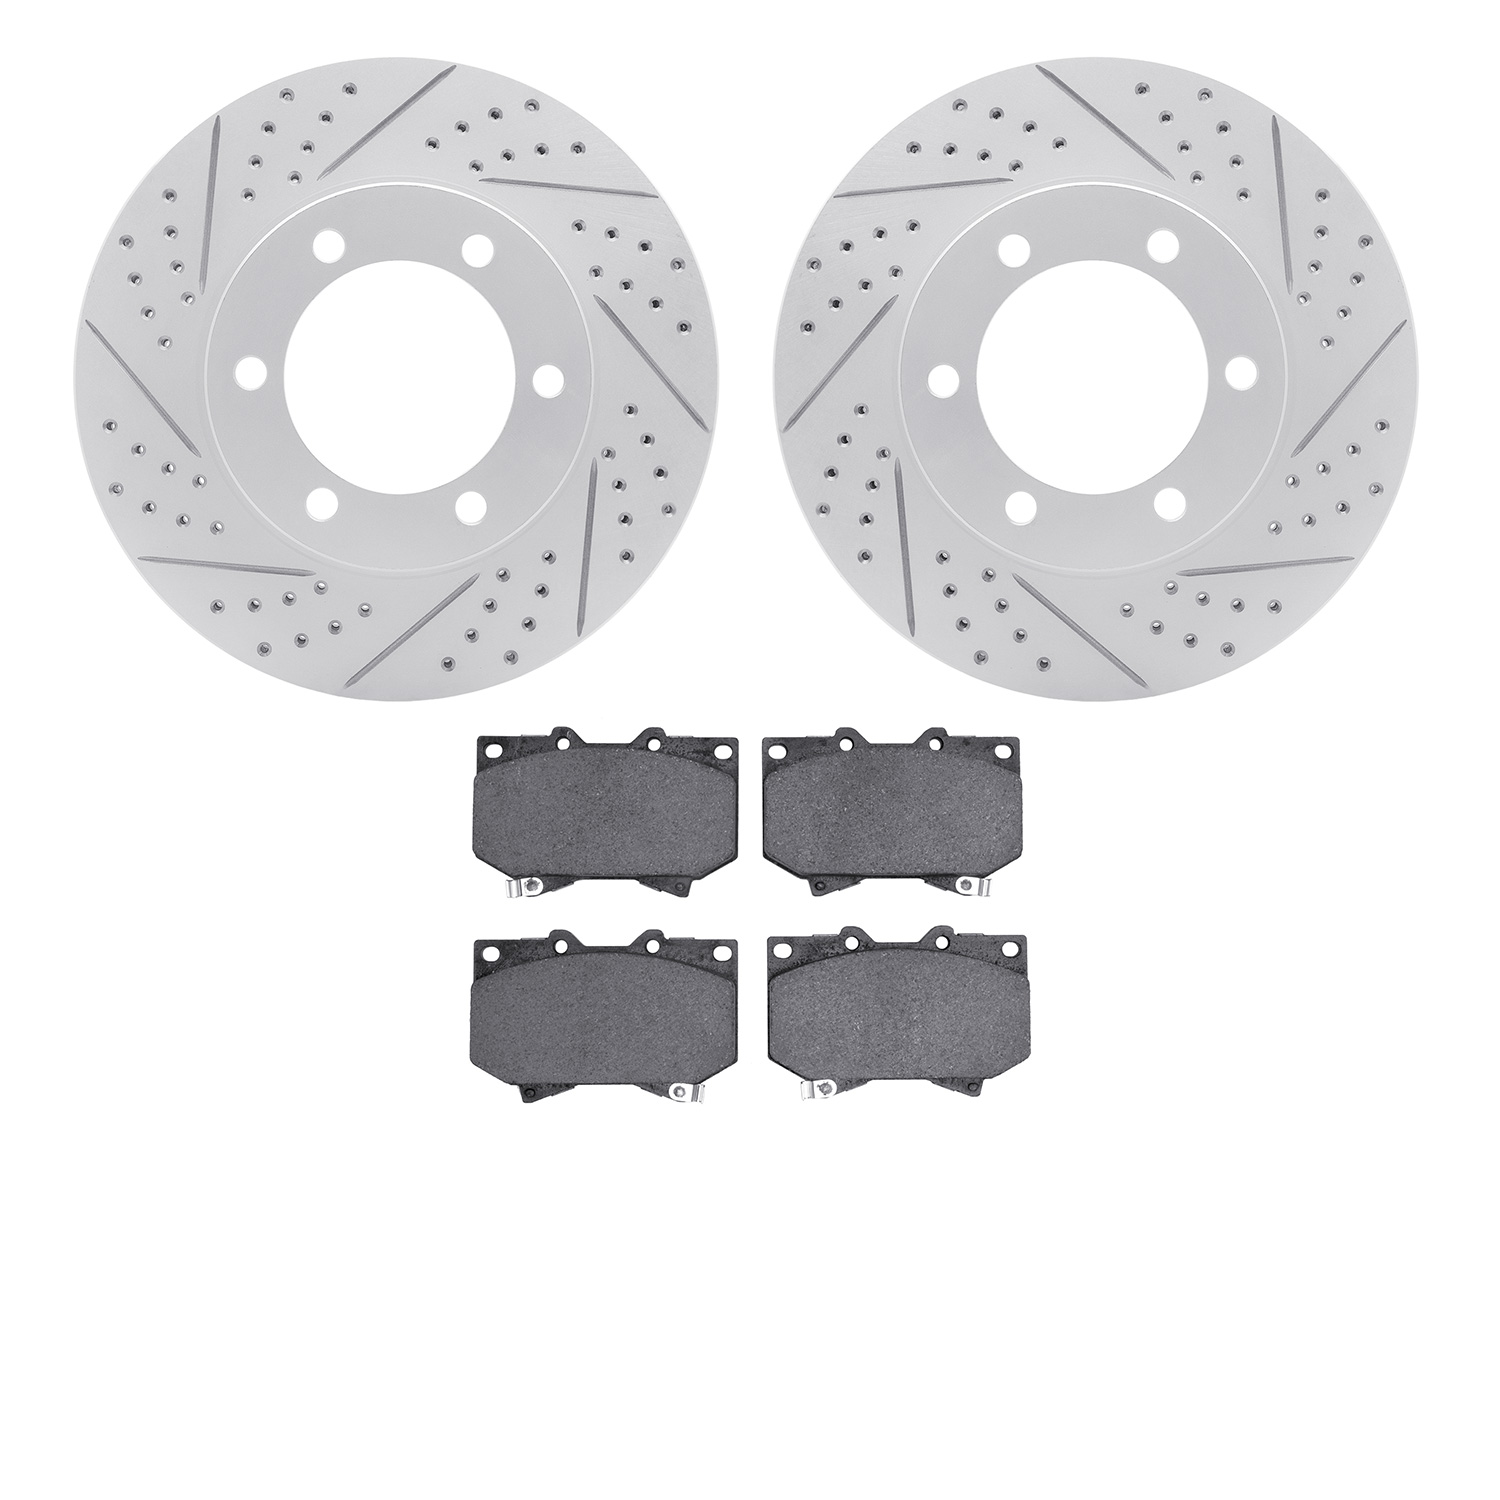 2402-76007 Geoperformance Drilled/Slotted Brake Rotors with Ultimate-Duty Brake Pads Kit, 2000-2002 Lexus/Toyota/Scion, Position